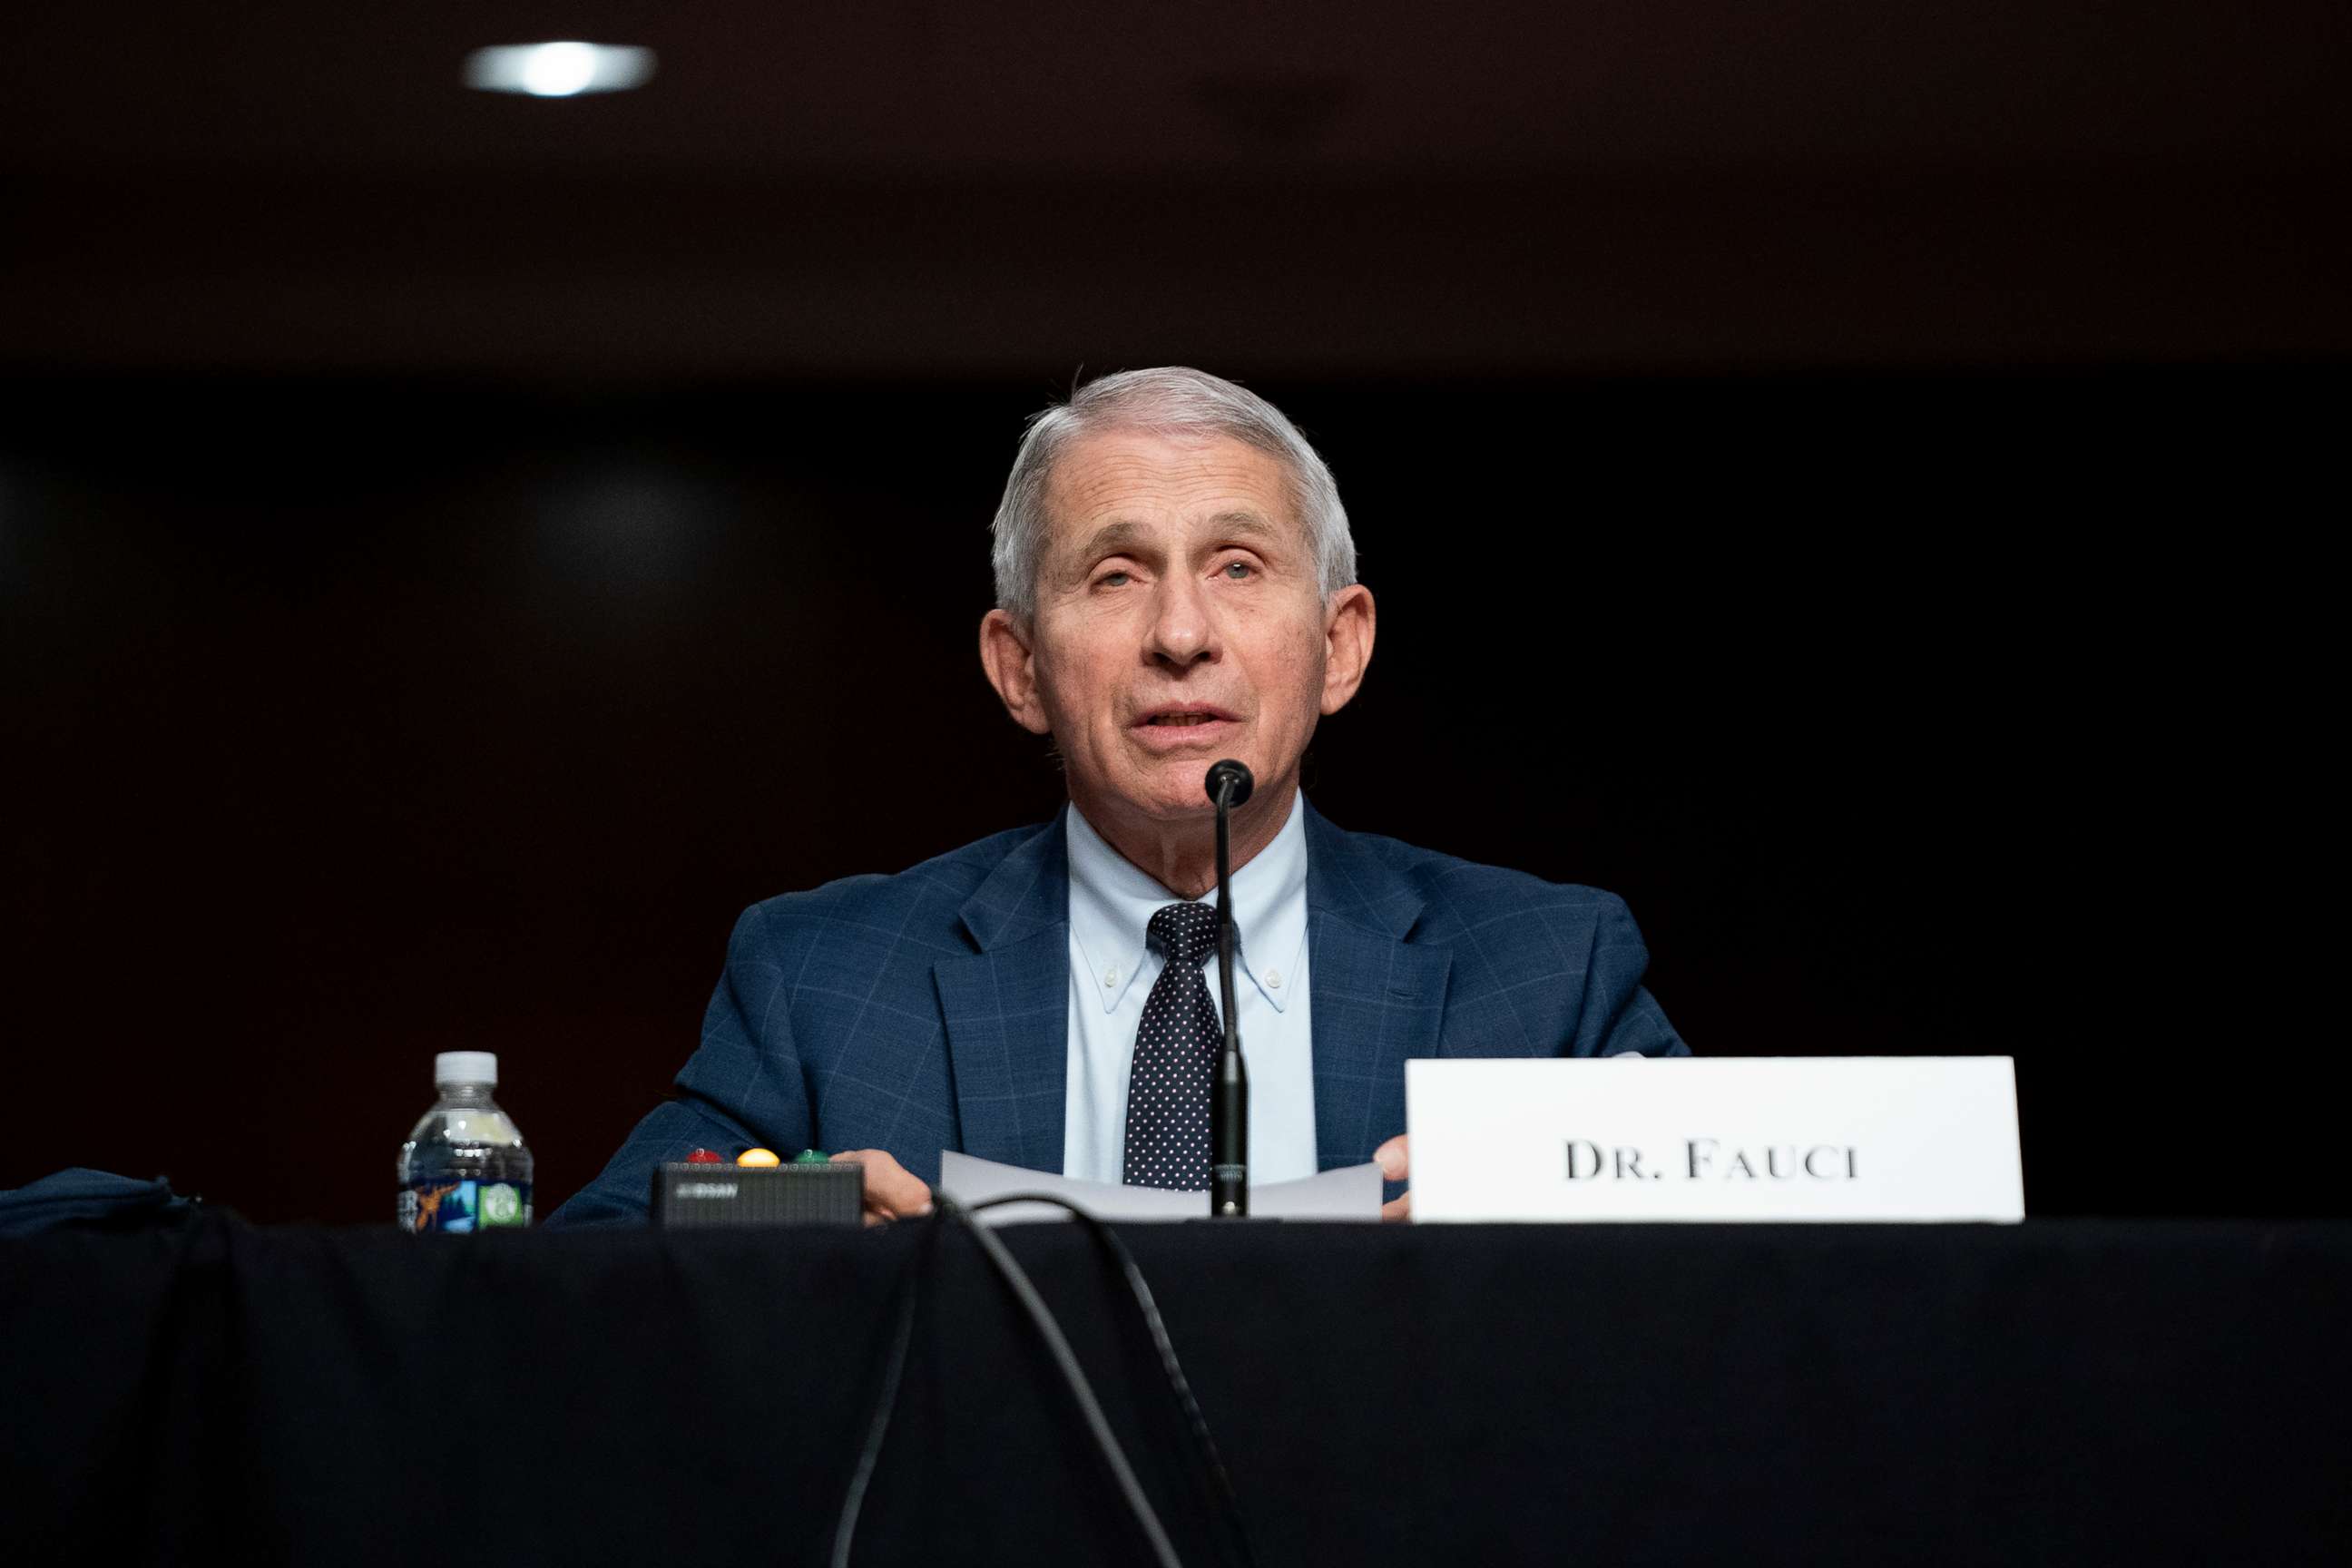 PHOTO: In this Jan. 11, 2022, file photo, Dr. Anthony Fauci, White House Chief Medical Advisor and Director of the NIAID, testifies at a Senate Health, Education, Labor, and Pensions Committee hearing on Capitol Hill in Washington, D.C.